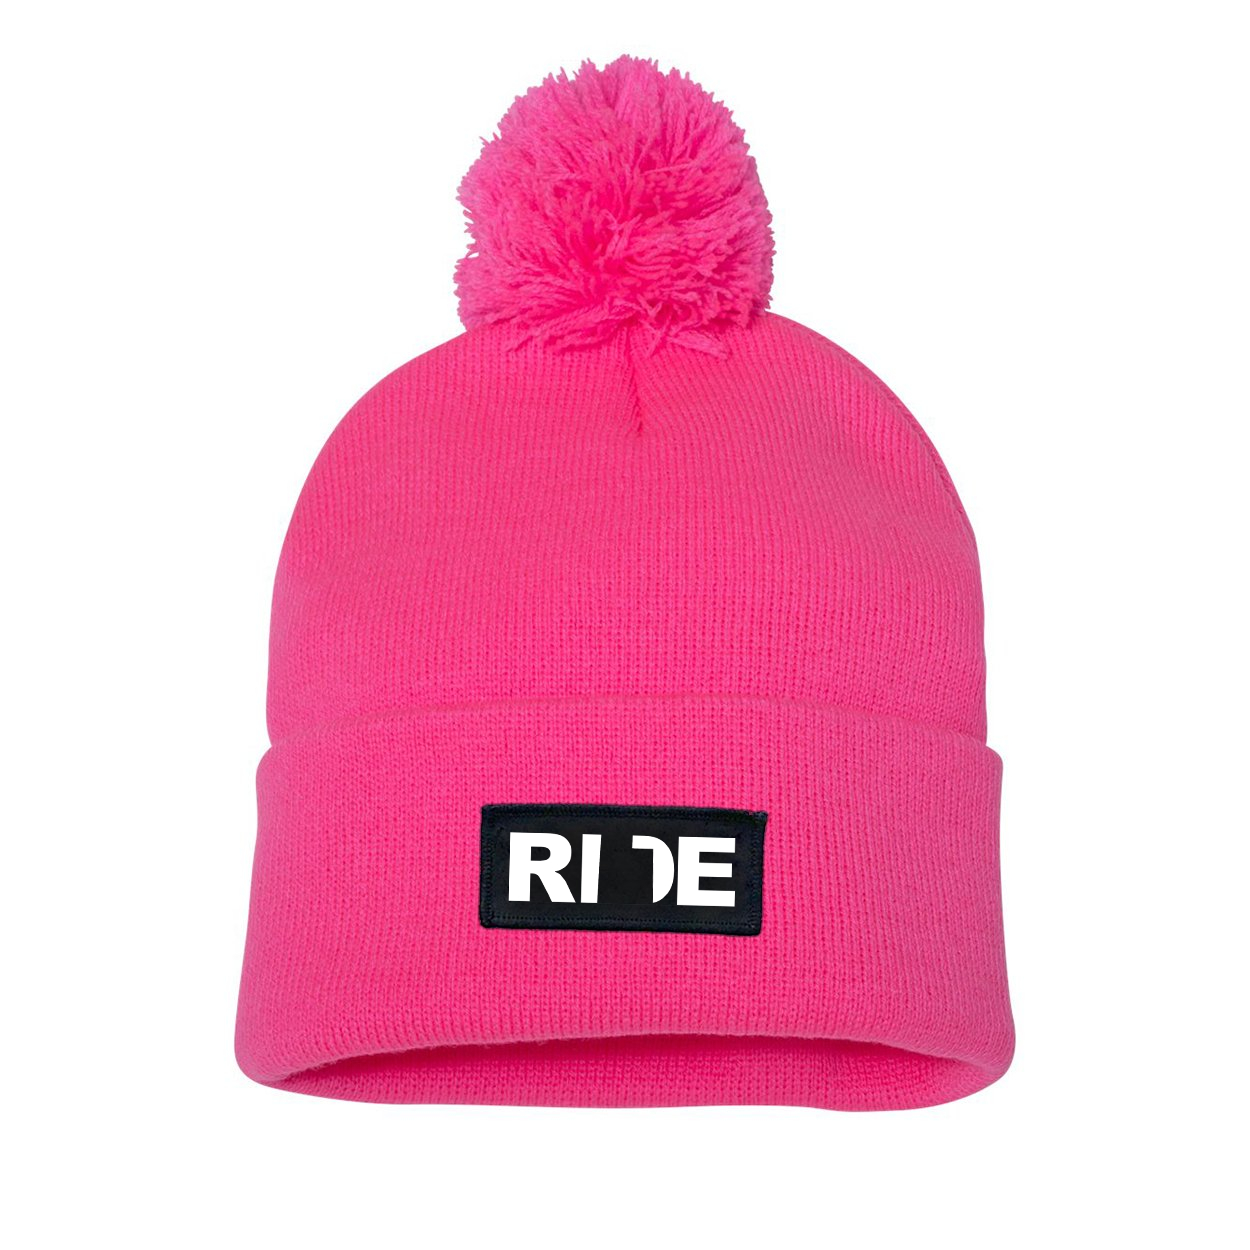 Ride Utah Night Out Woven Patch Roll Up Pom Knit Beanie Pink (White Logo)